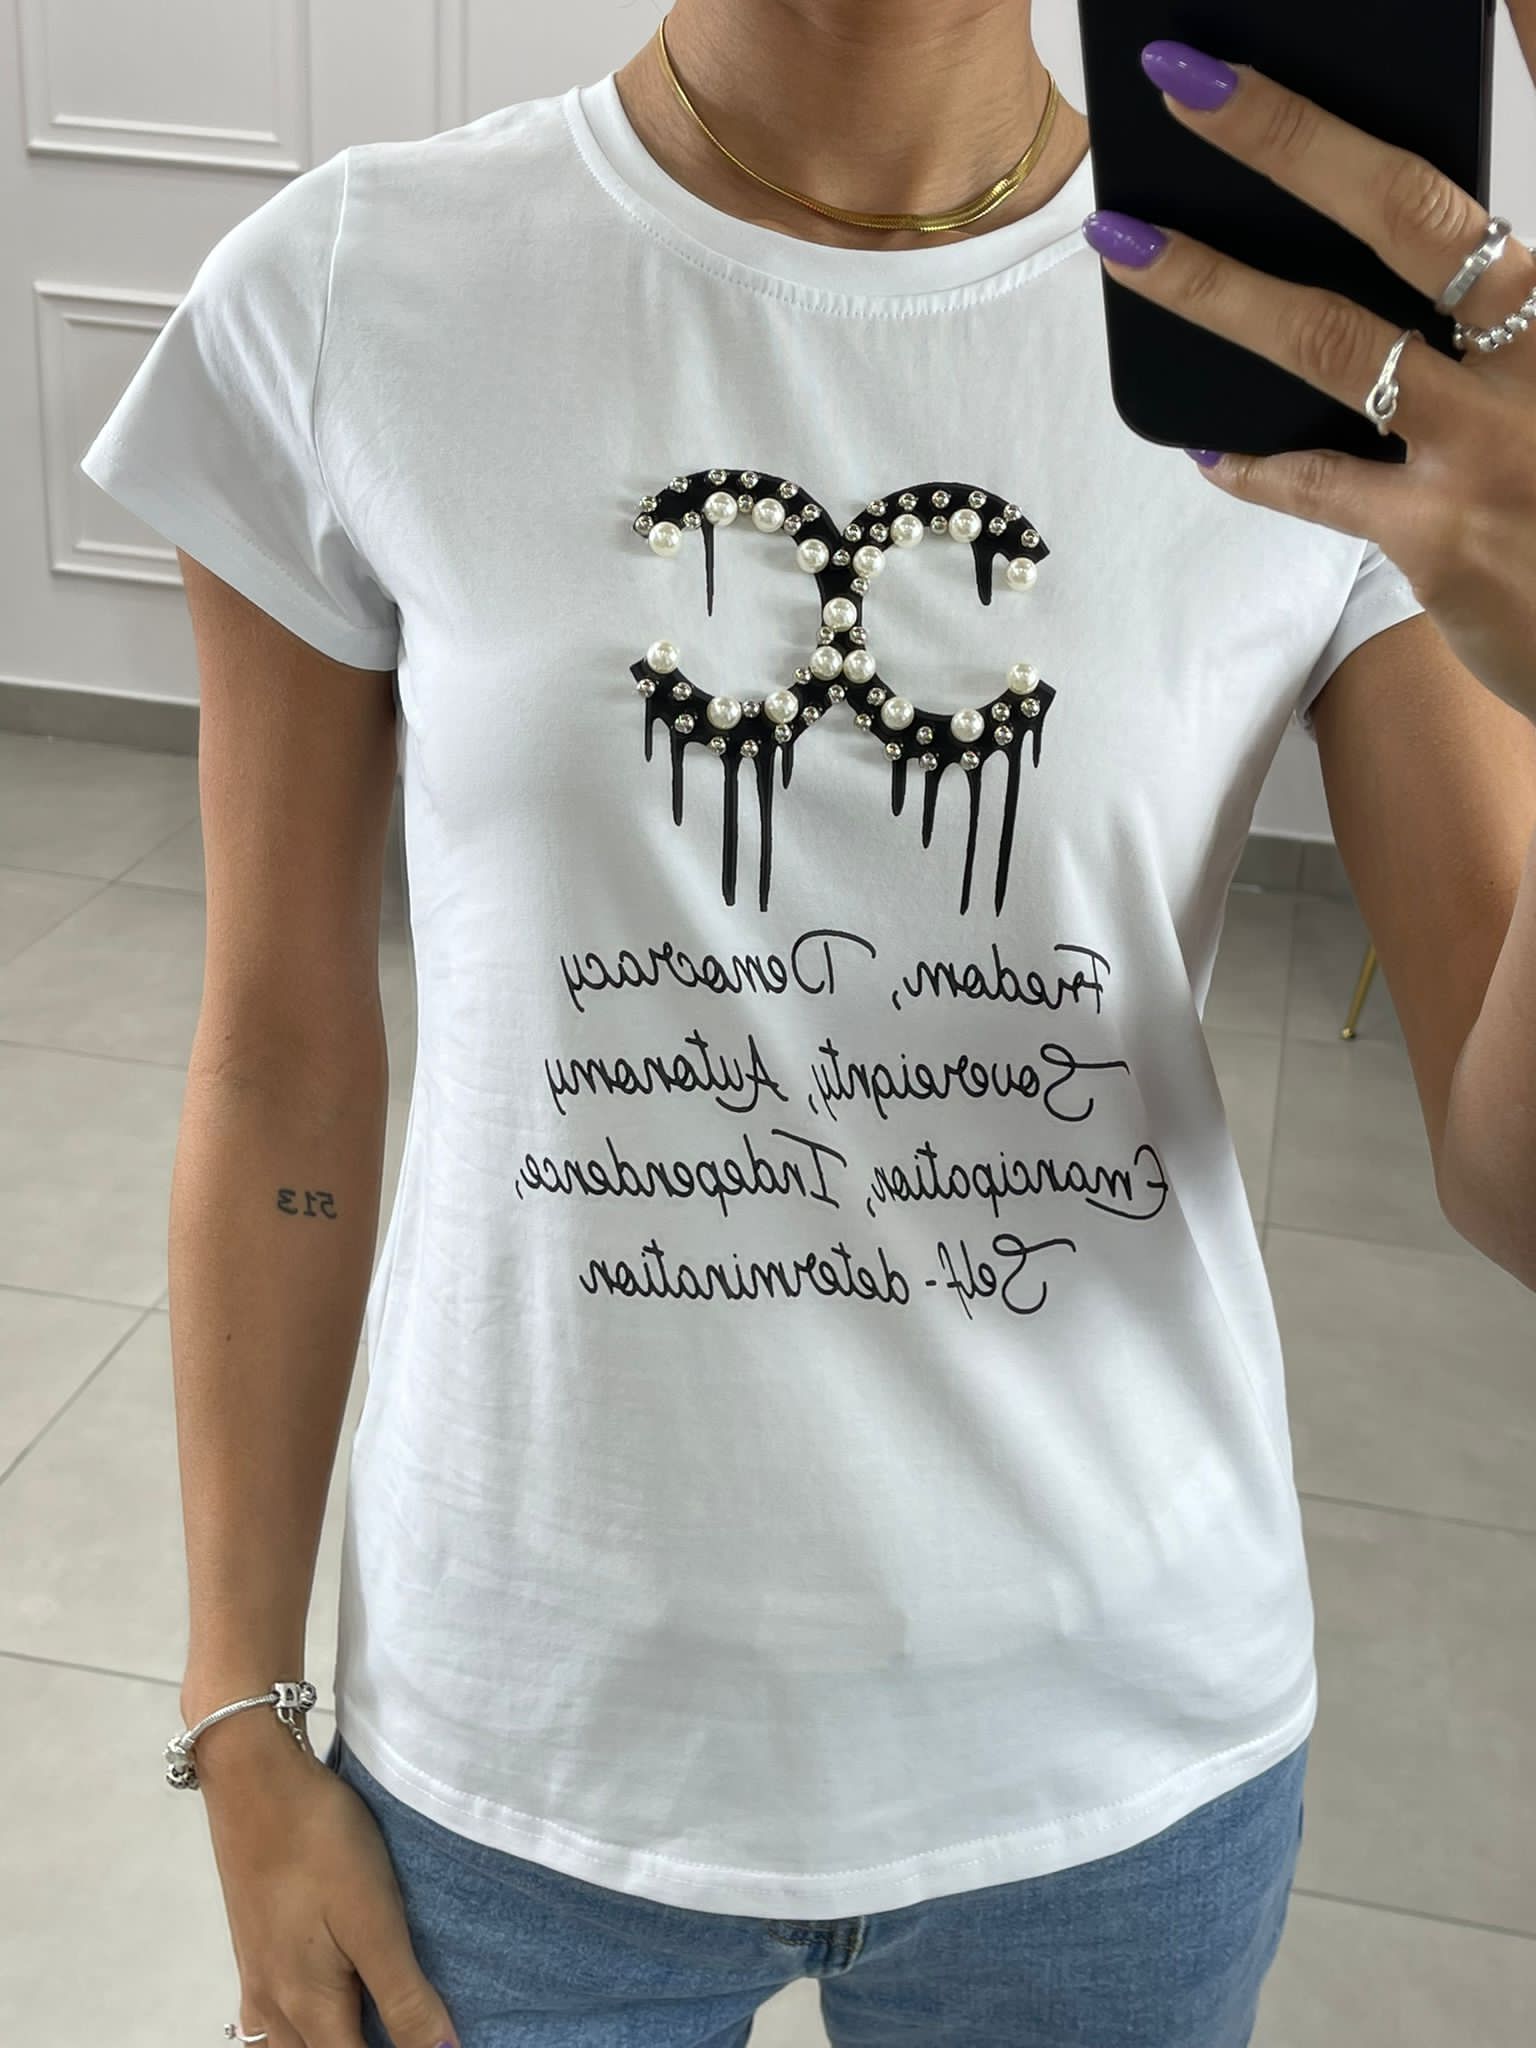 T-SHIRT STAMPA E PERLE NEW COLLECTION